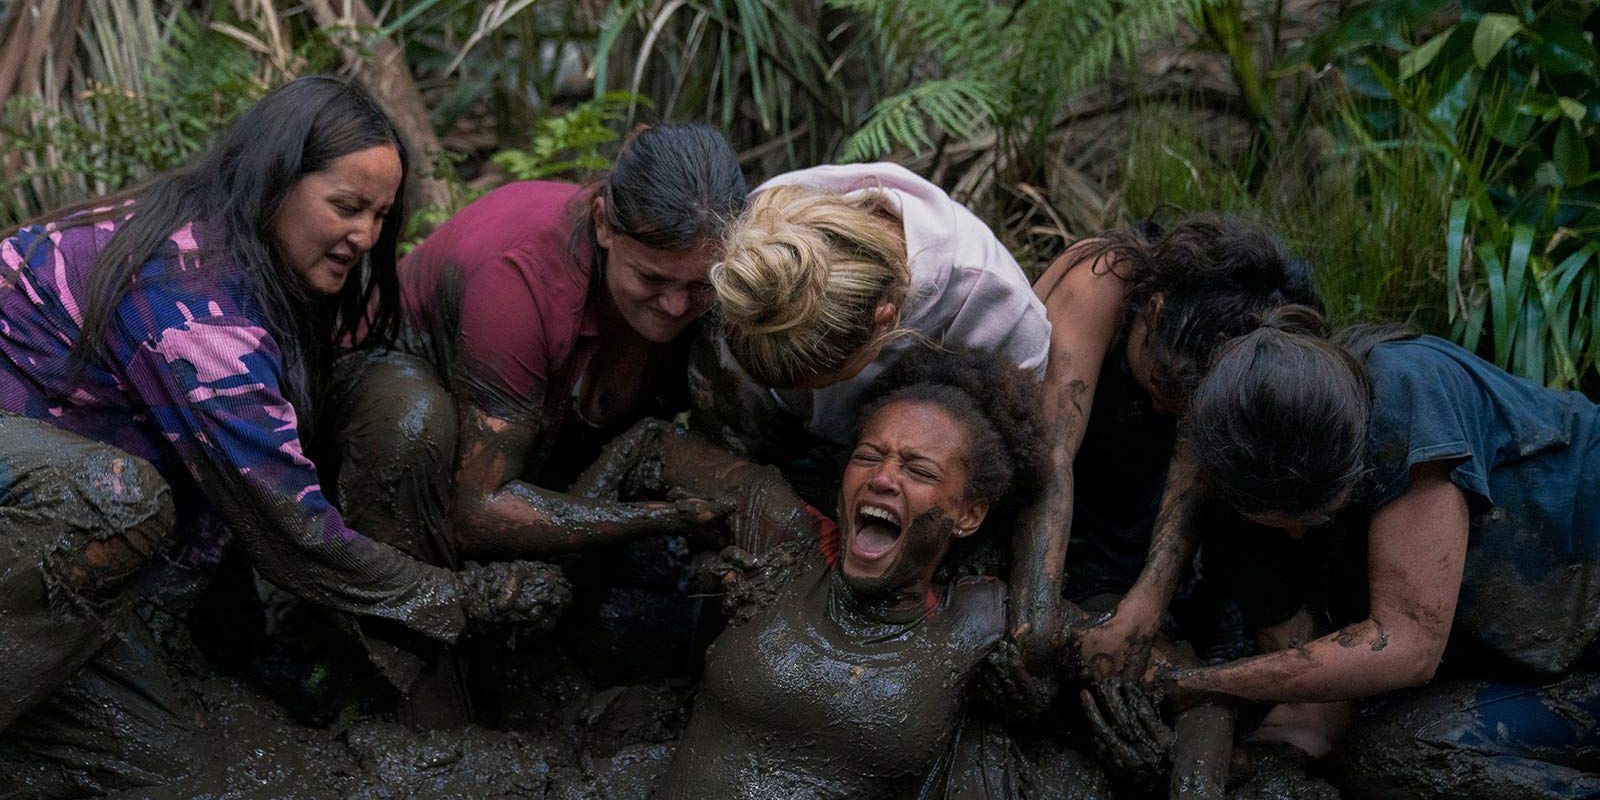 Wilds Girls help Rachel get out of the mud